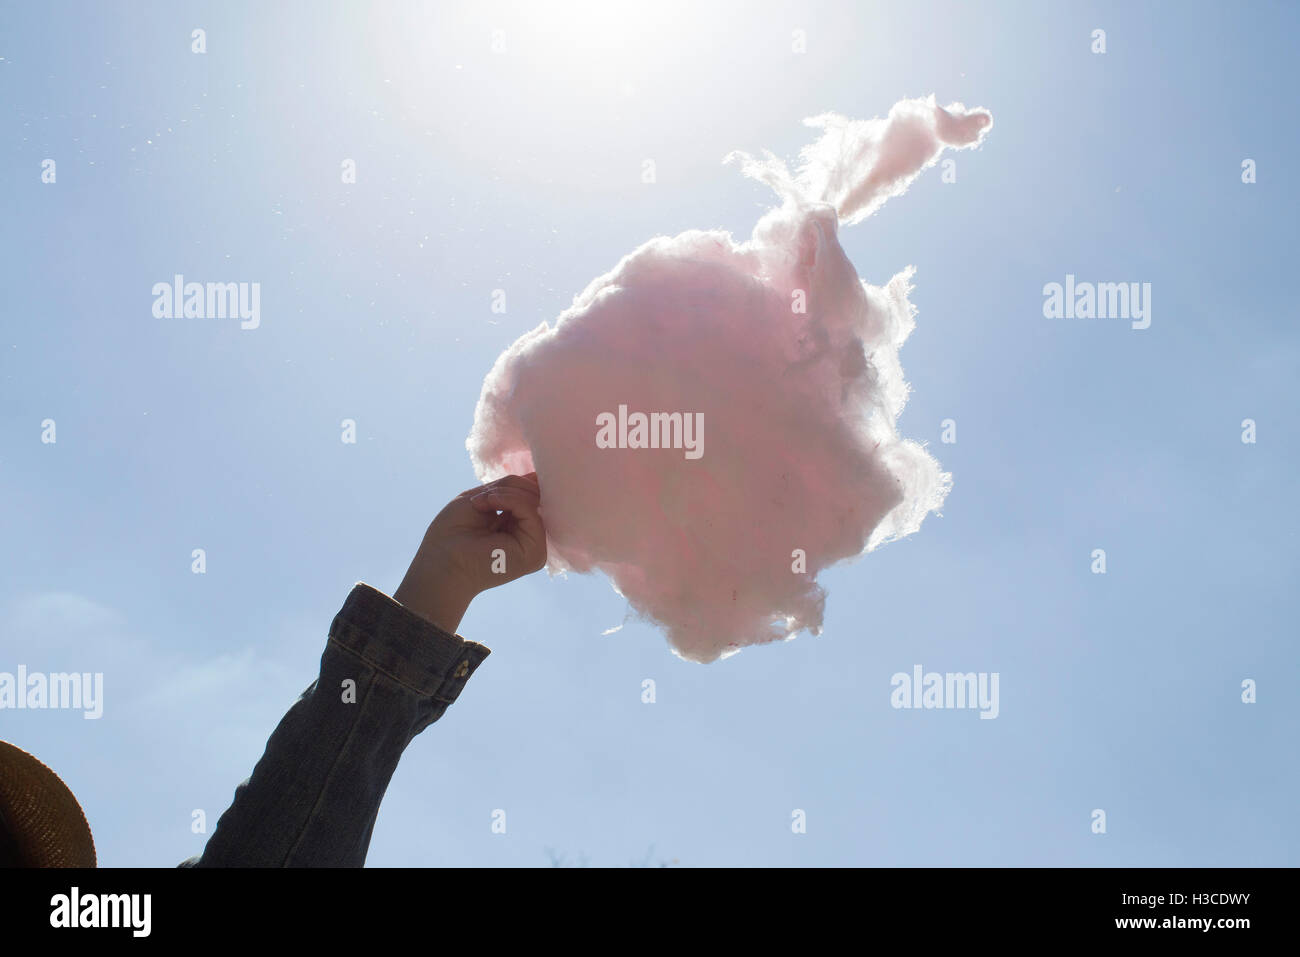 Hand holding cotton candy against blue sky Stock Photo